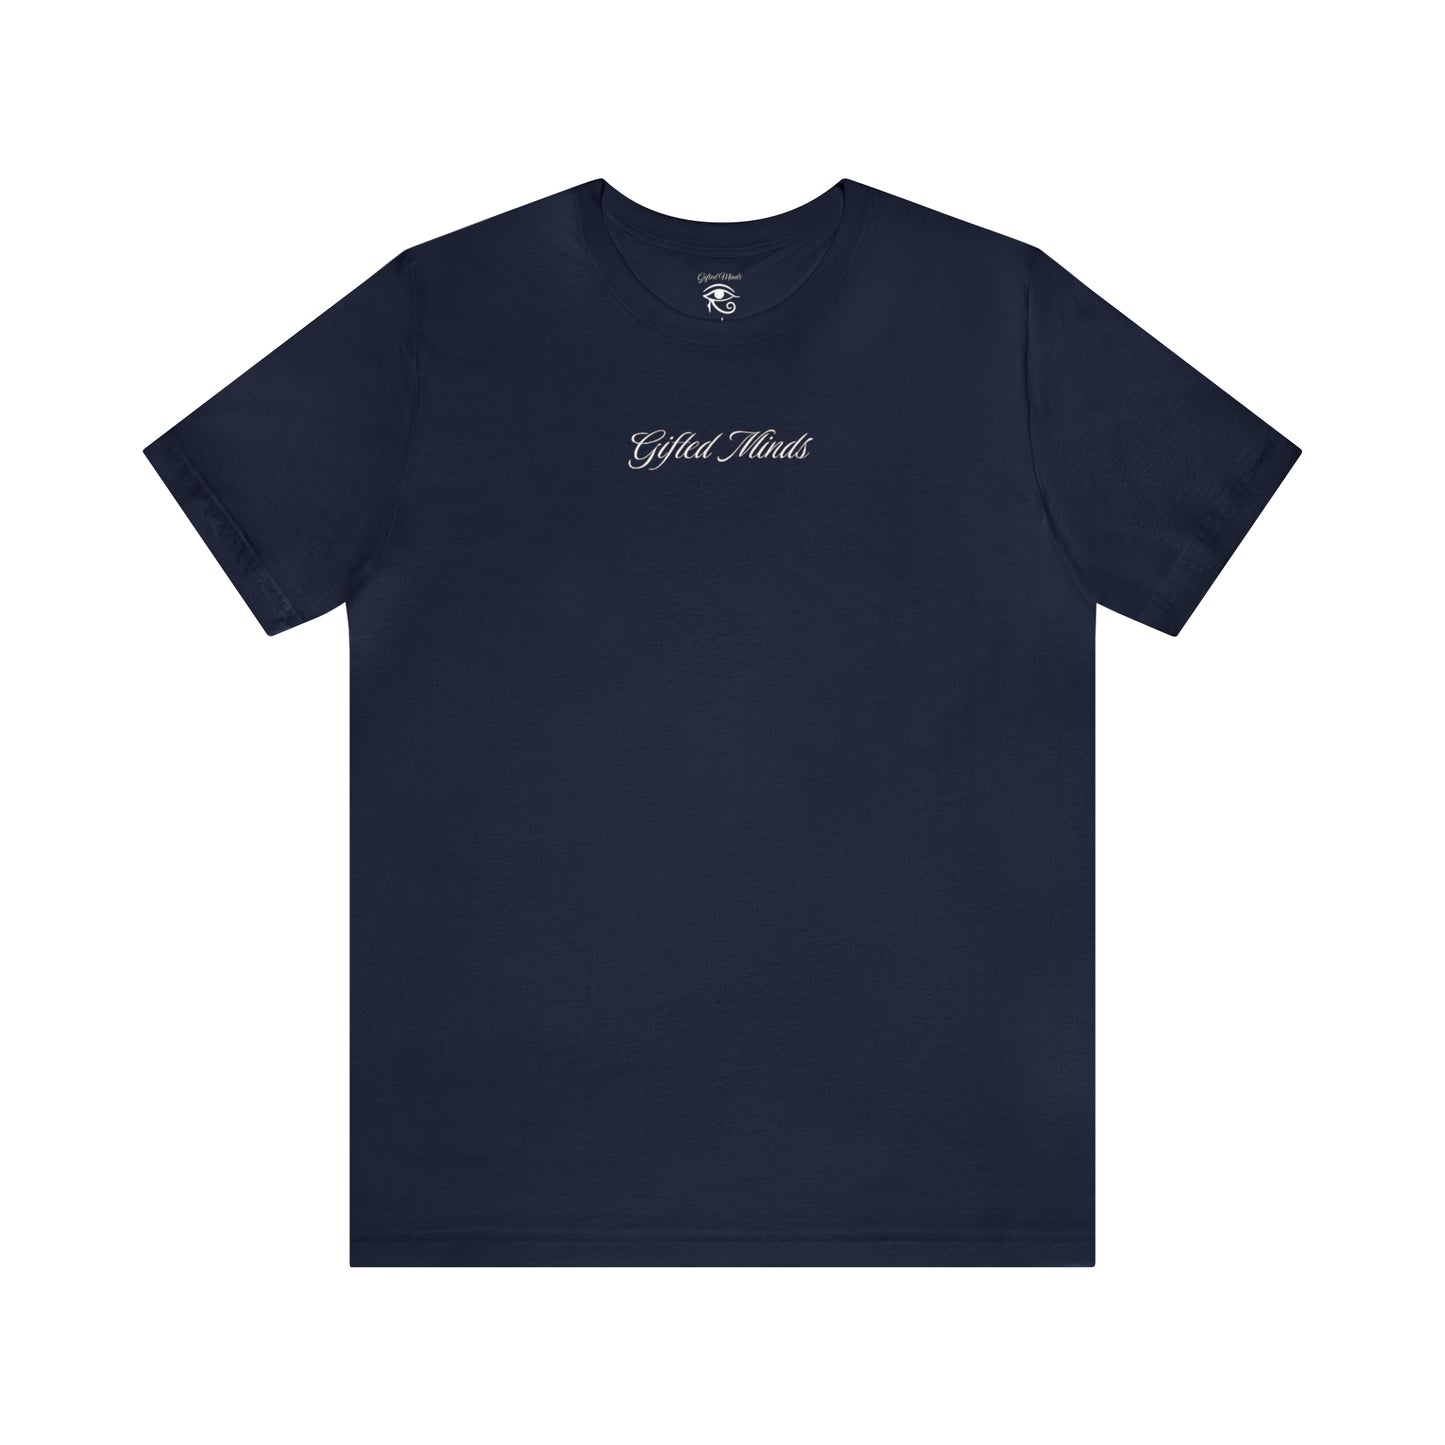 Loyalty over Royalty Short Sleeve Tee - GFTD MNDS